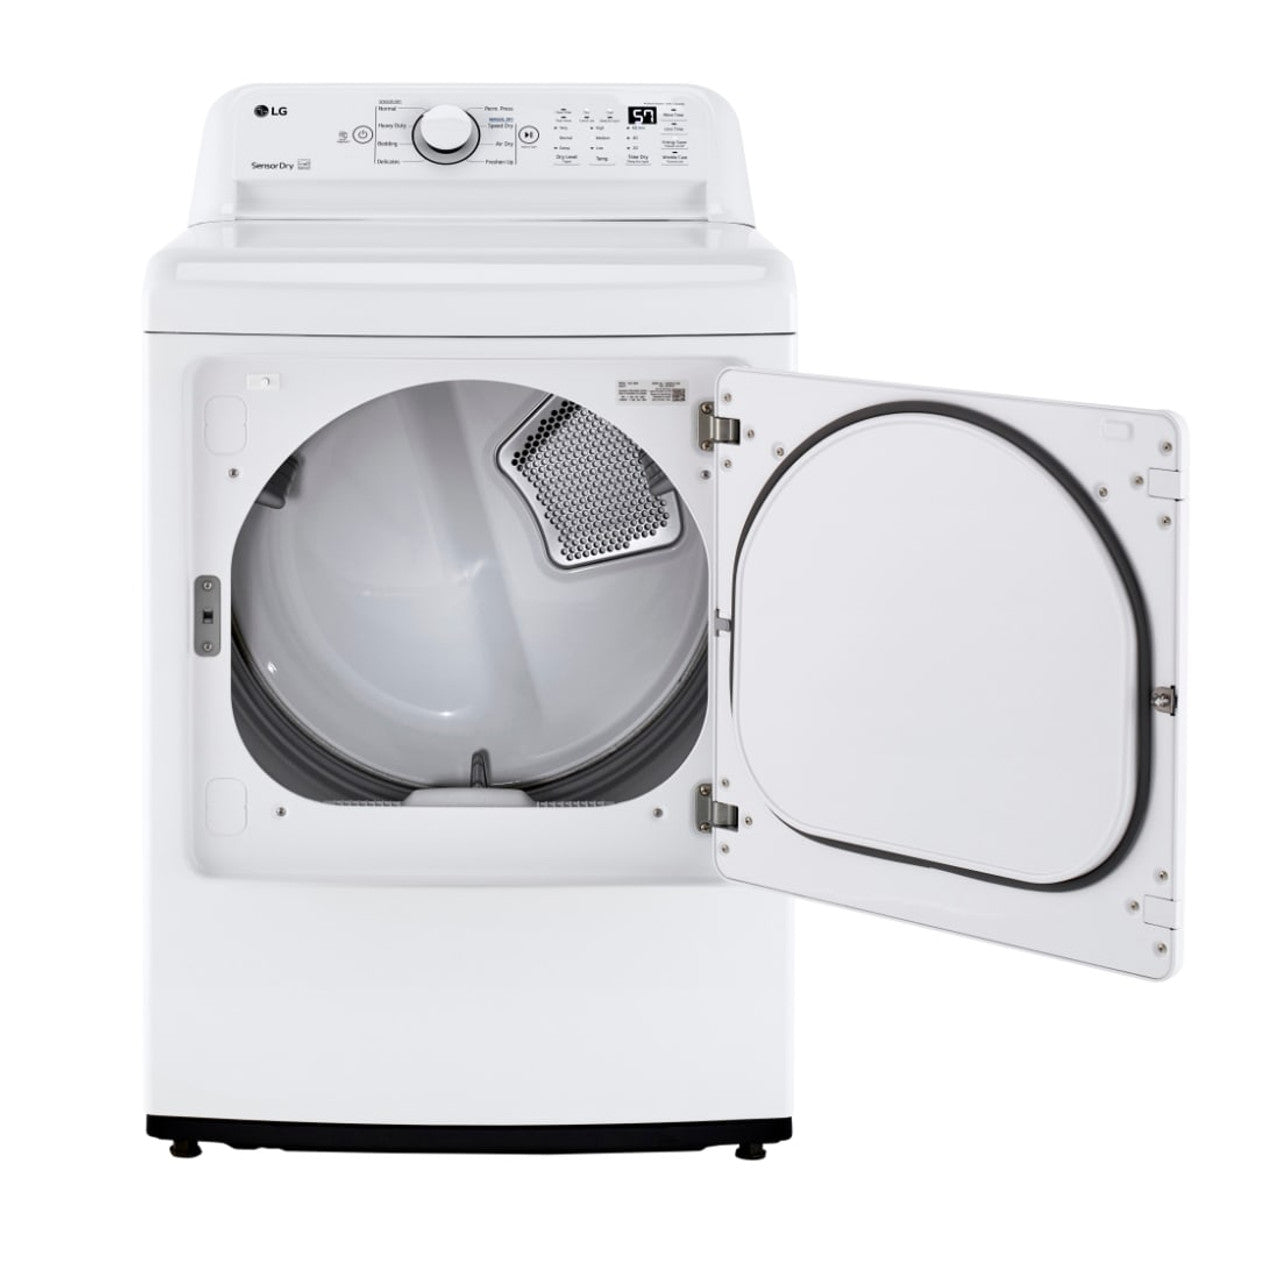 OPEN BOX LG 7.3 cu. ft. Ultra Large Capacity Electric Dryer with Sensor Dry Technology - DLE7000W